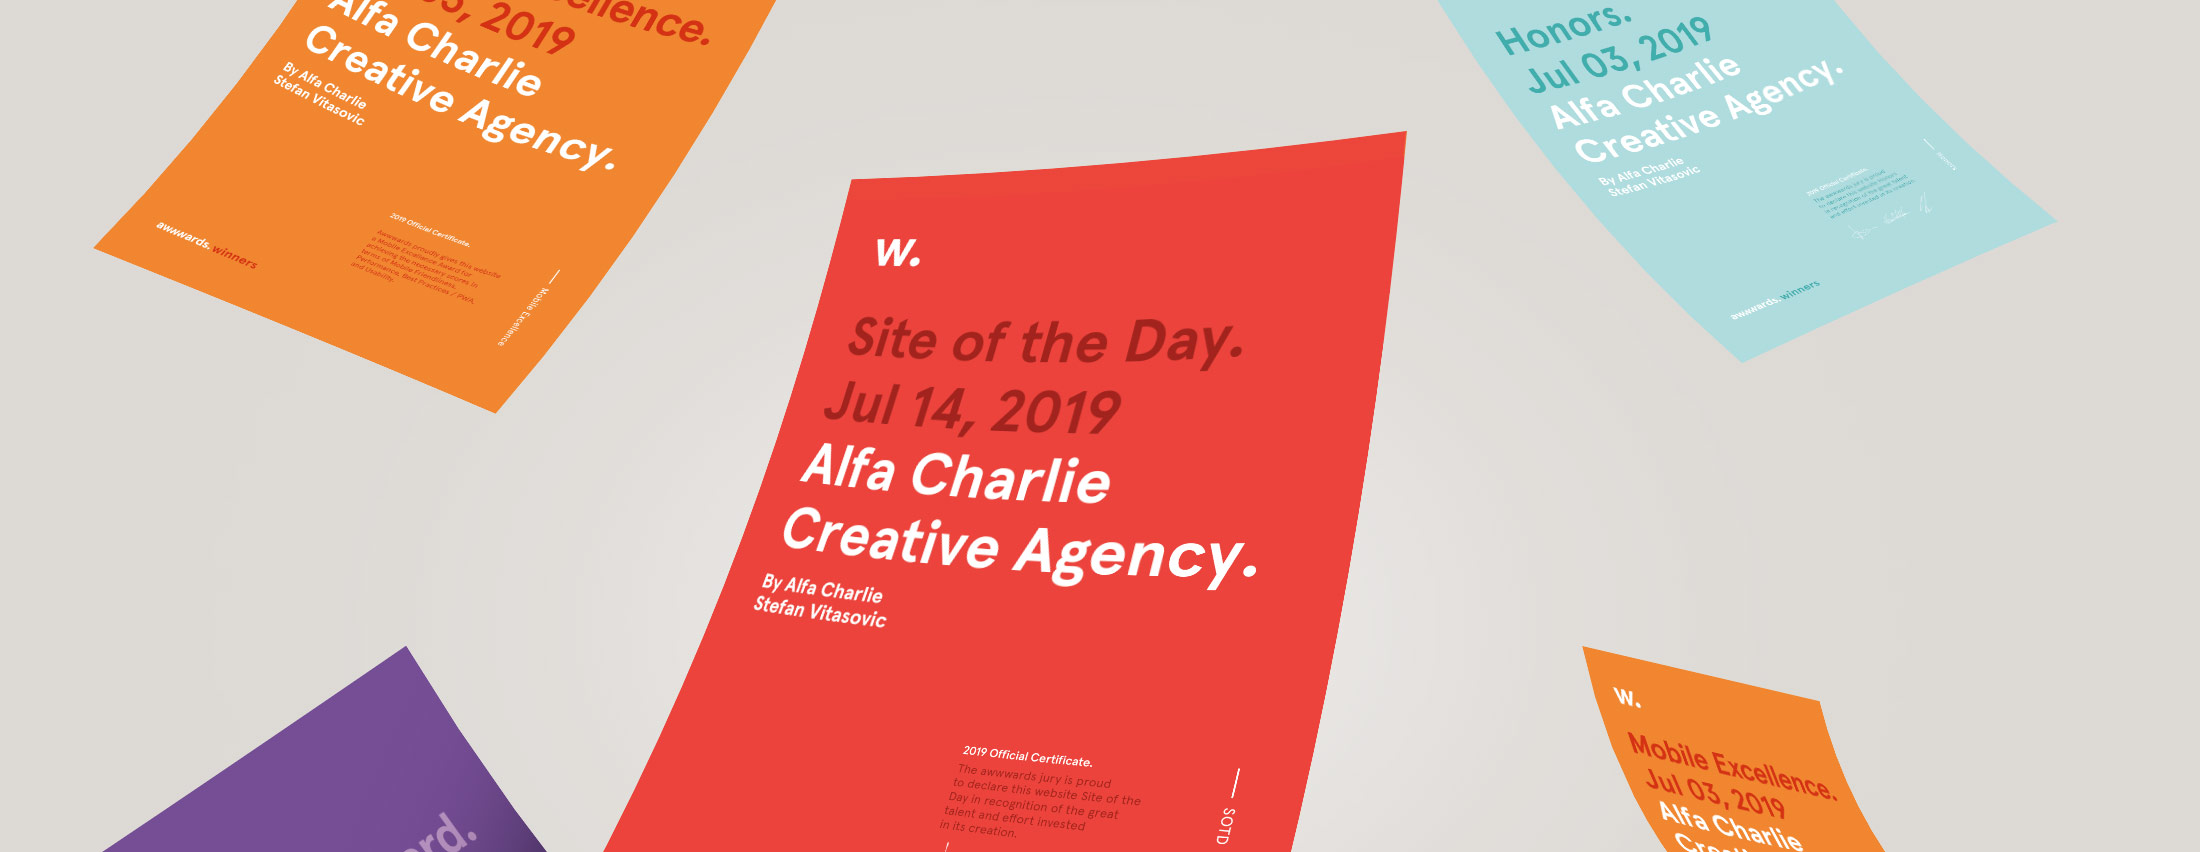 Alfa Charlie wins Site of the Day on Awwwards